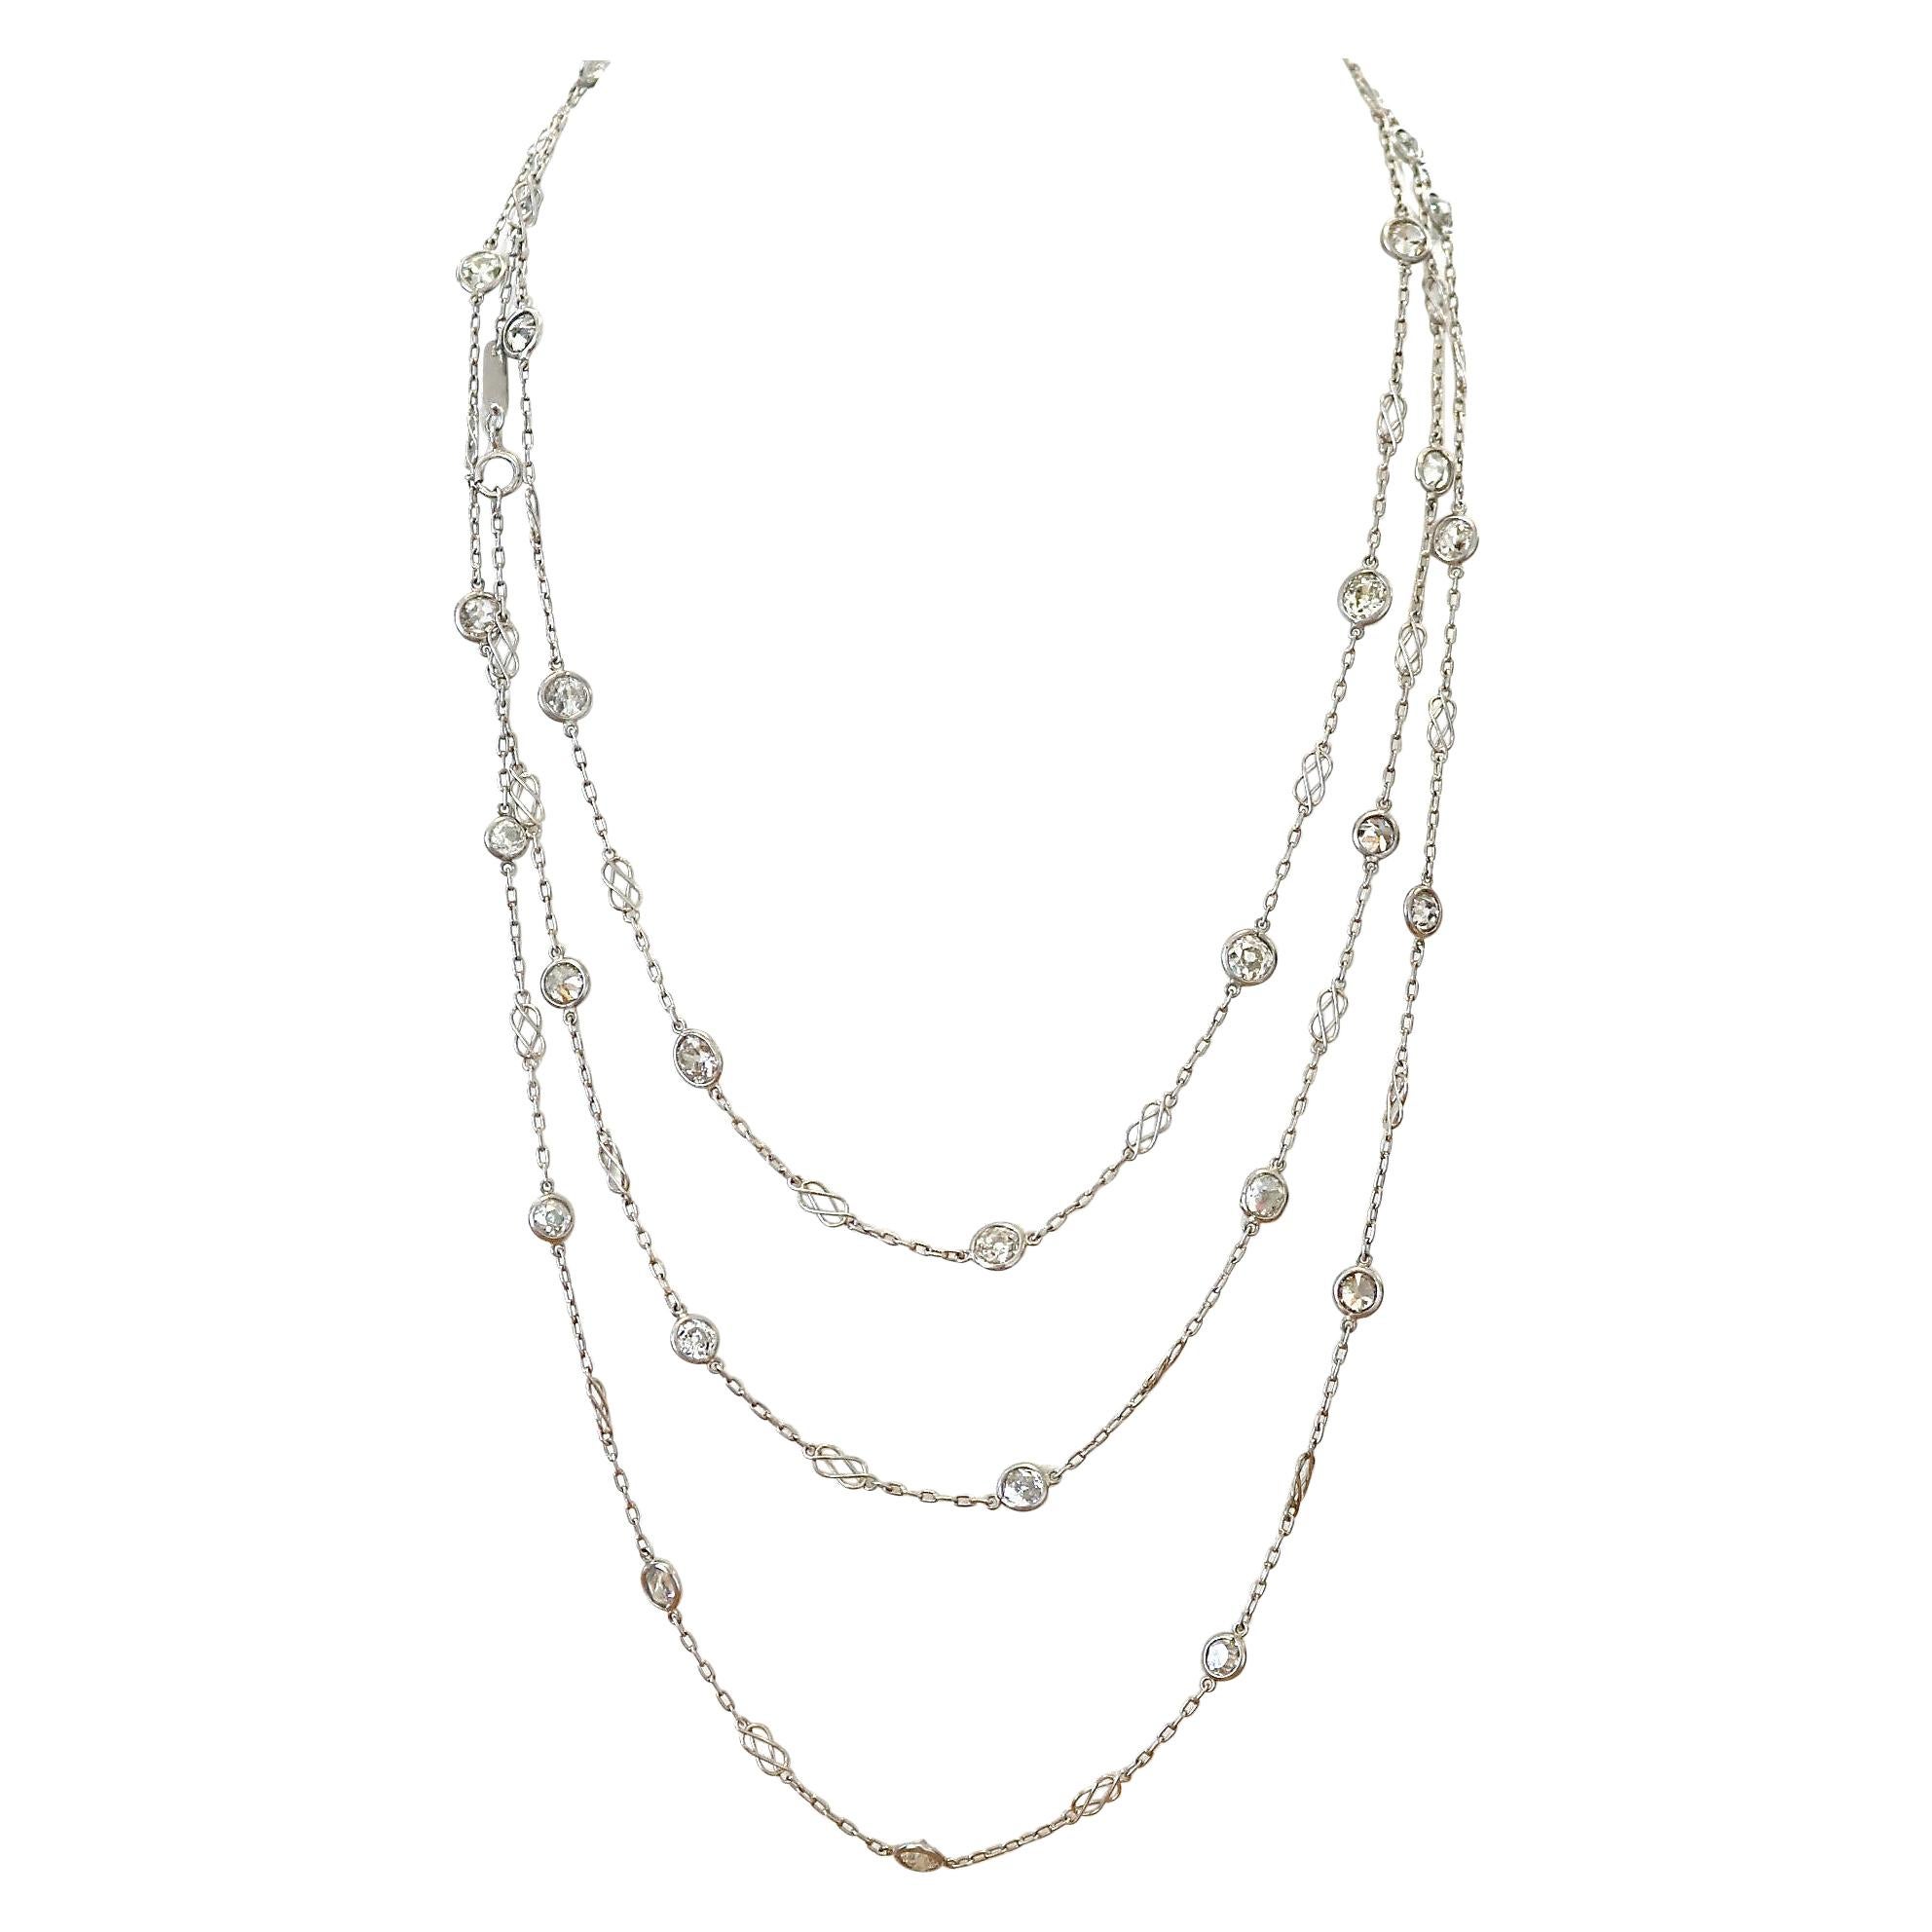 Art Deco Inspired 9.83 Carat Diamonds by The Yard Platinum Necklace